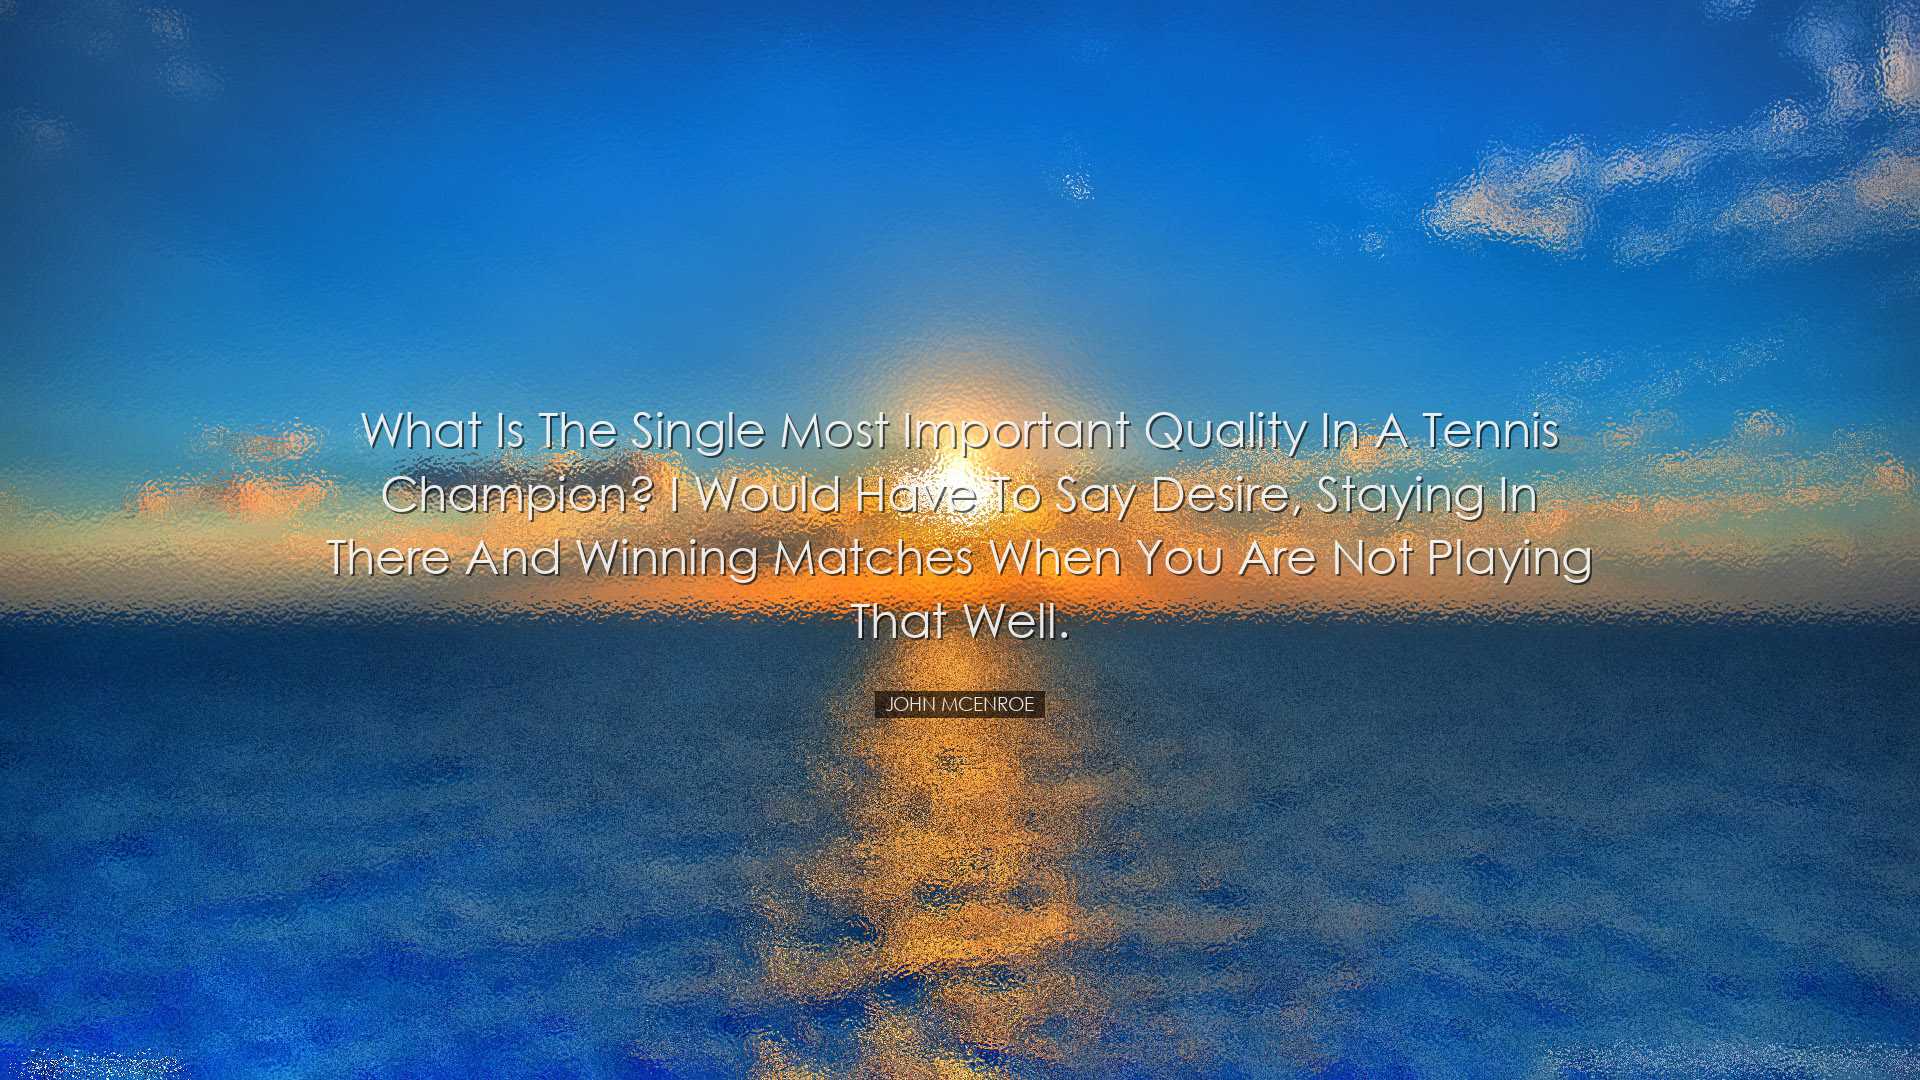 What is the single most important quality in a tennis champion? I